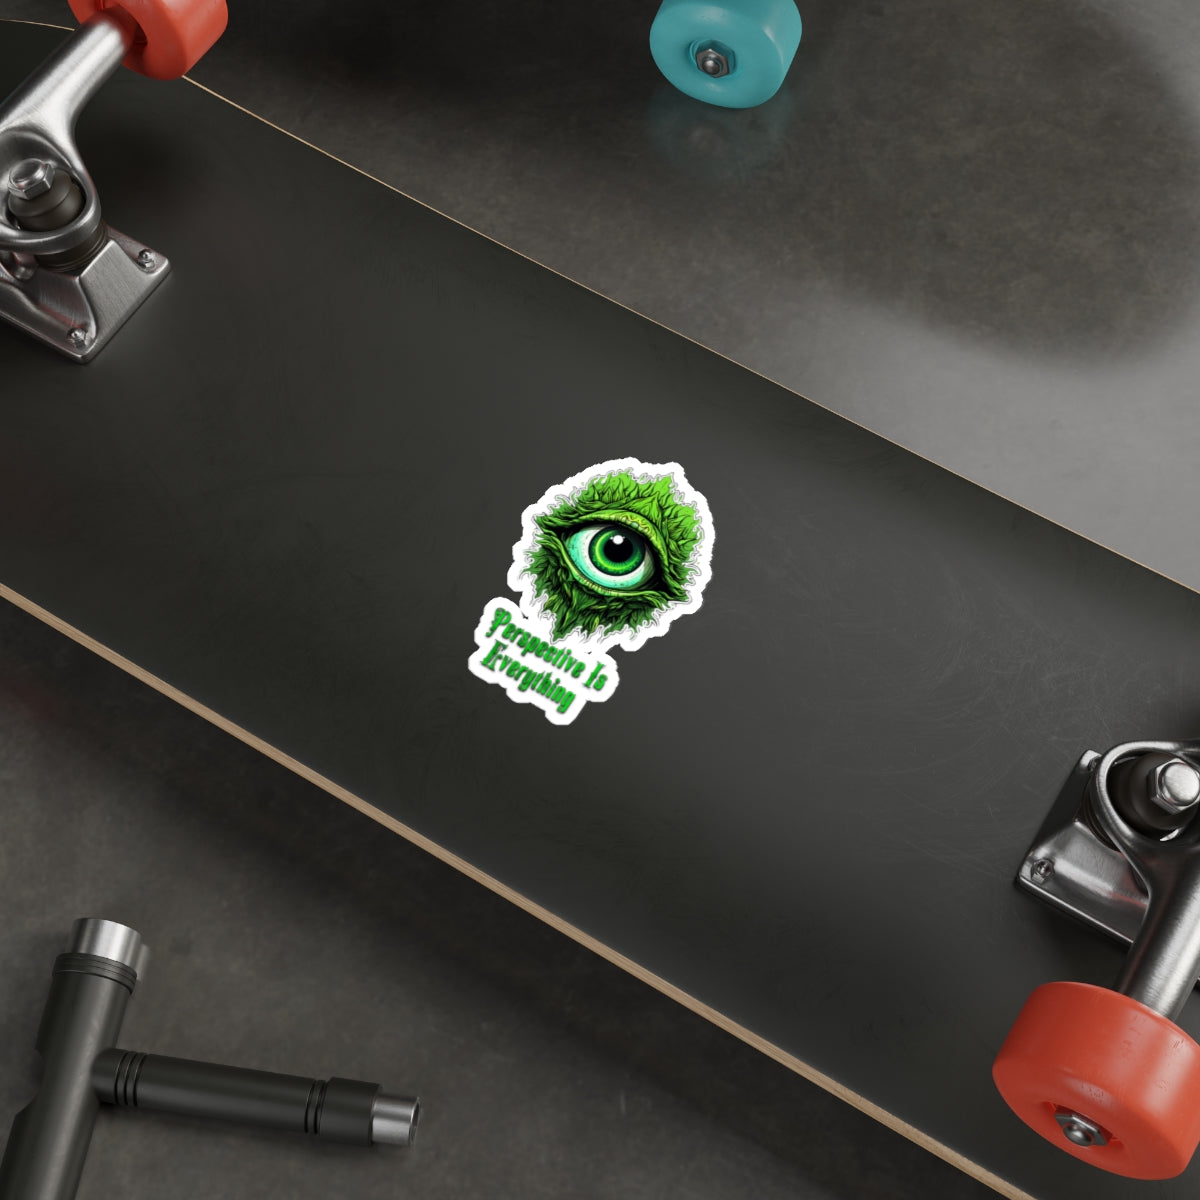 Perspective is Everything: Green | Die Cut Sticker